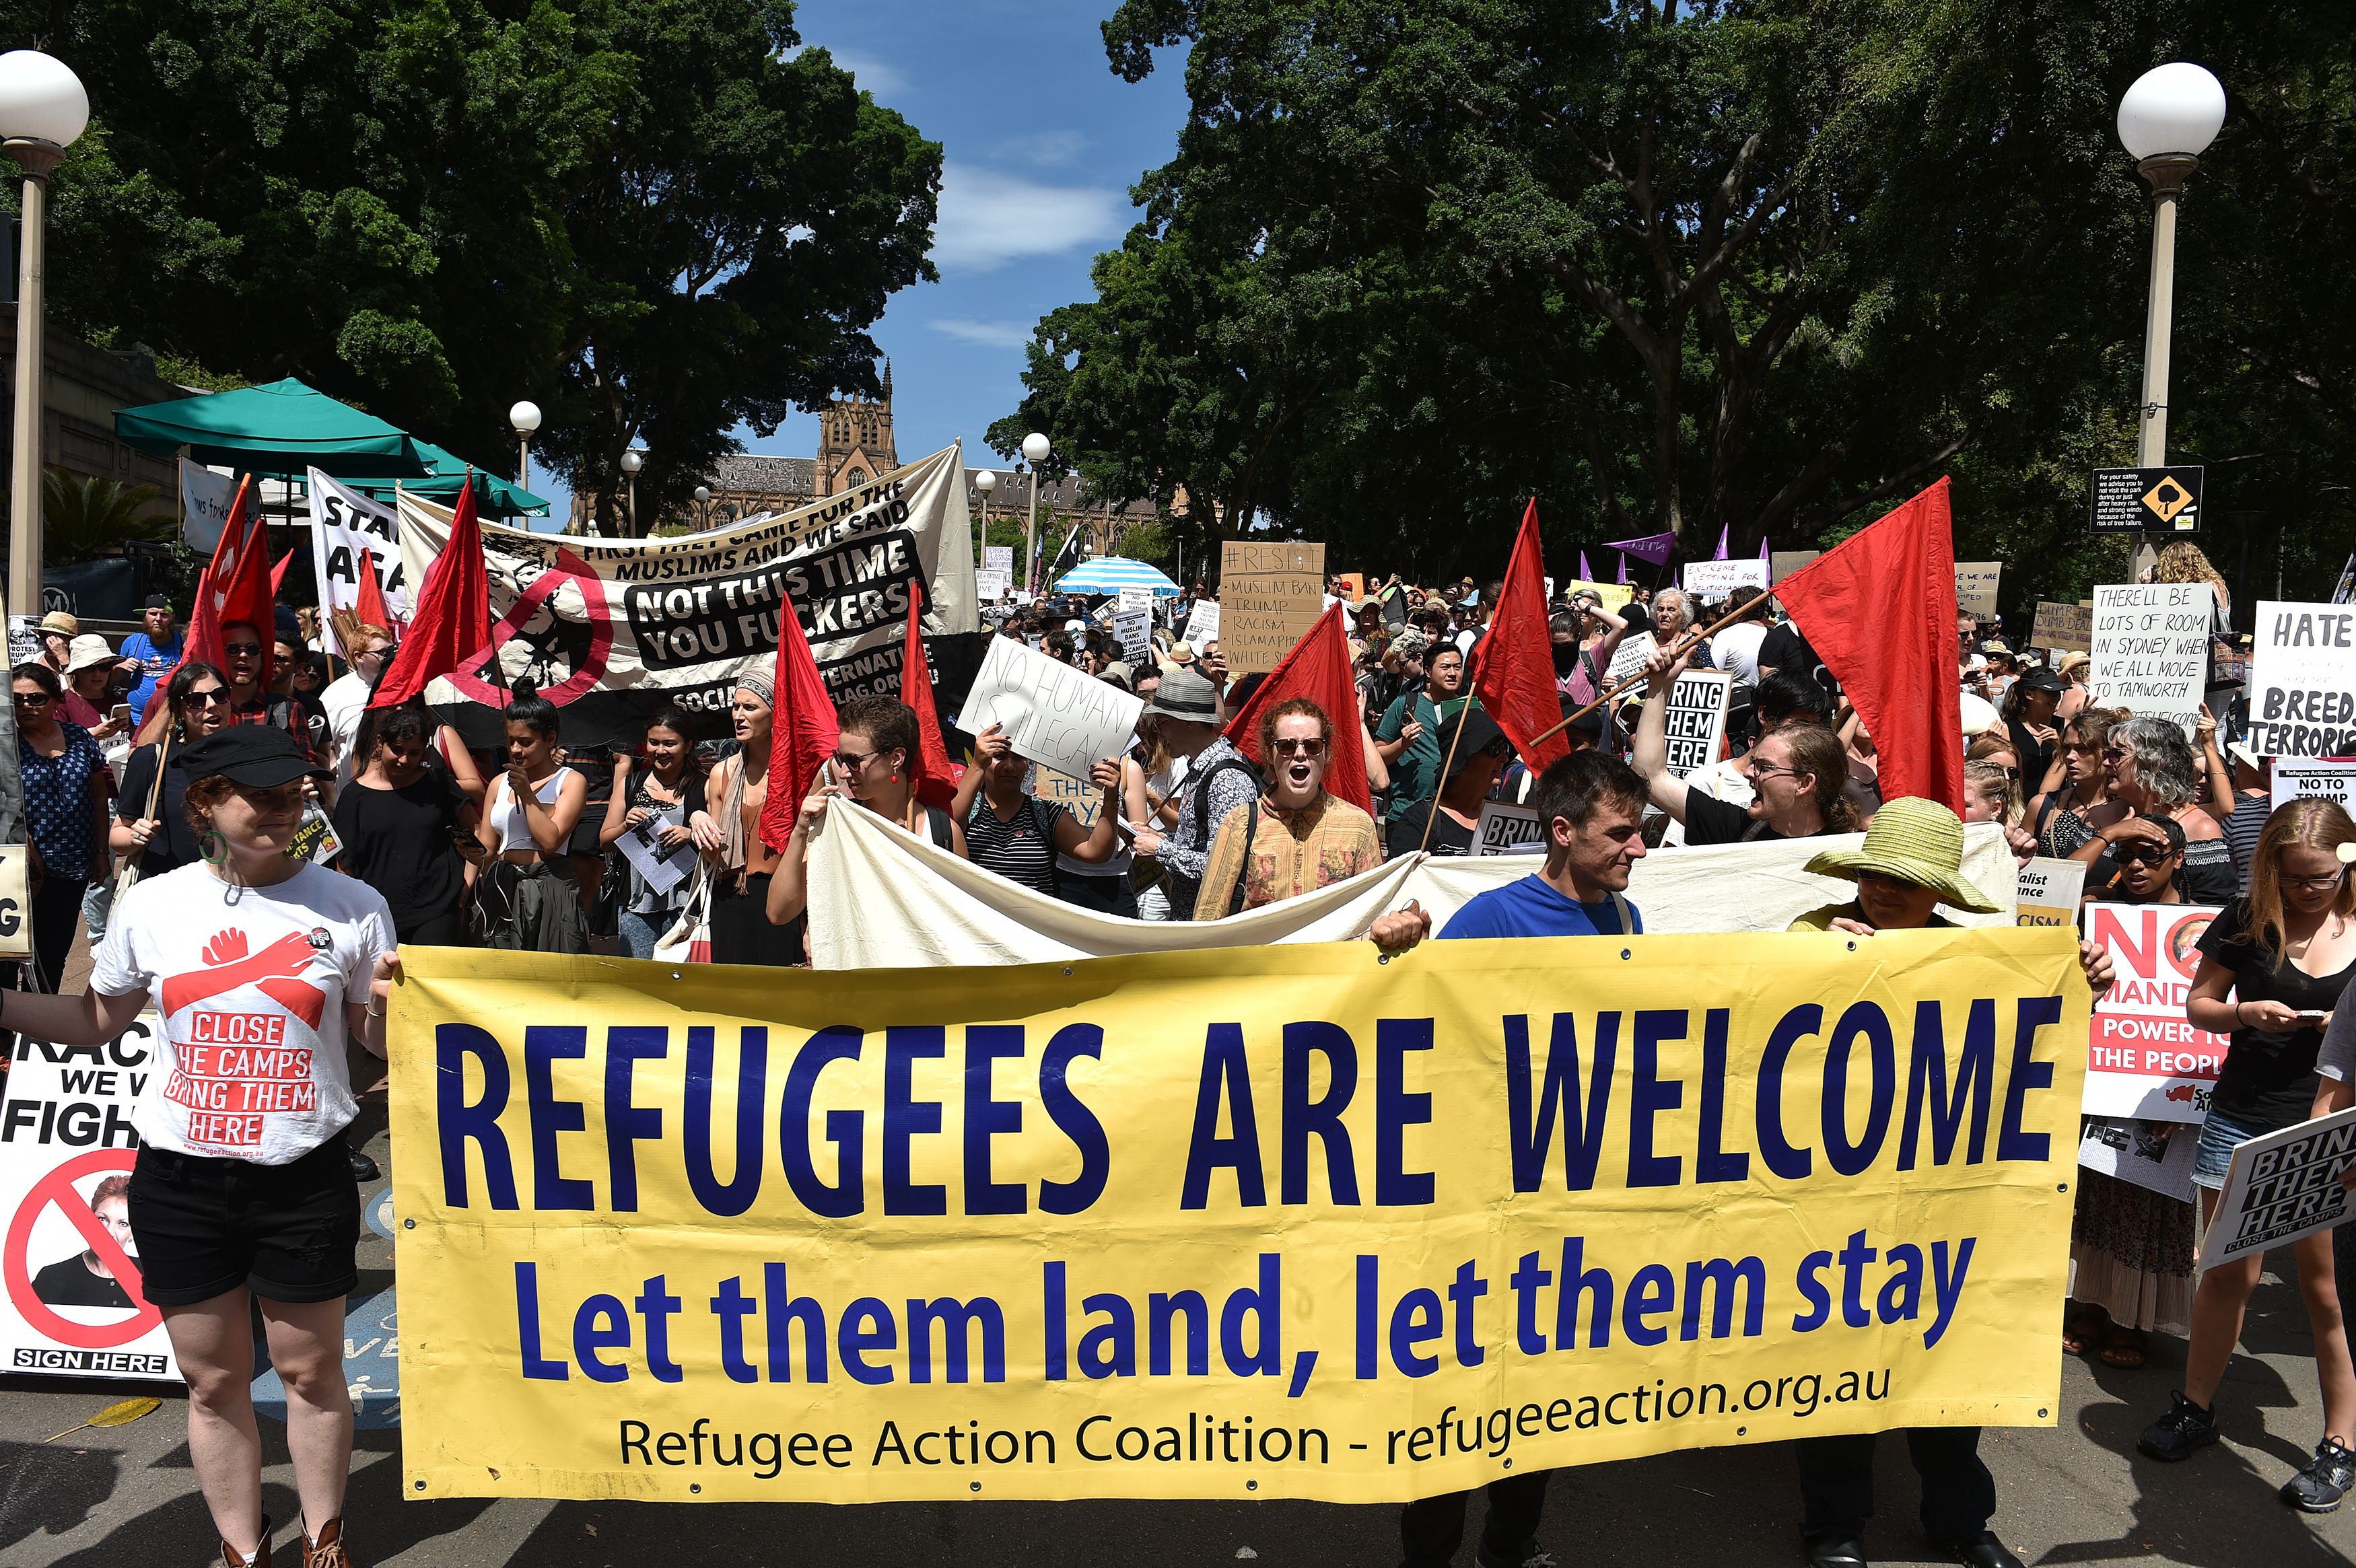 Protestors march on the streets of Sydney's central business district against US President Donald Trump's travel ban policy on February 4, 2017. (SAEED KHAN/AFP/Getty Images)